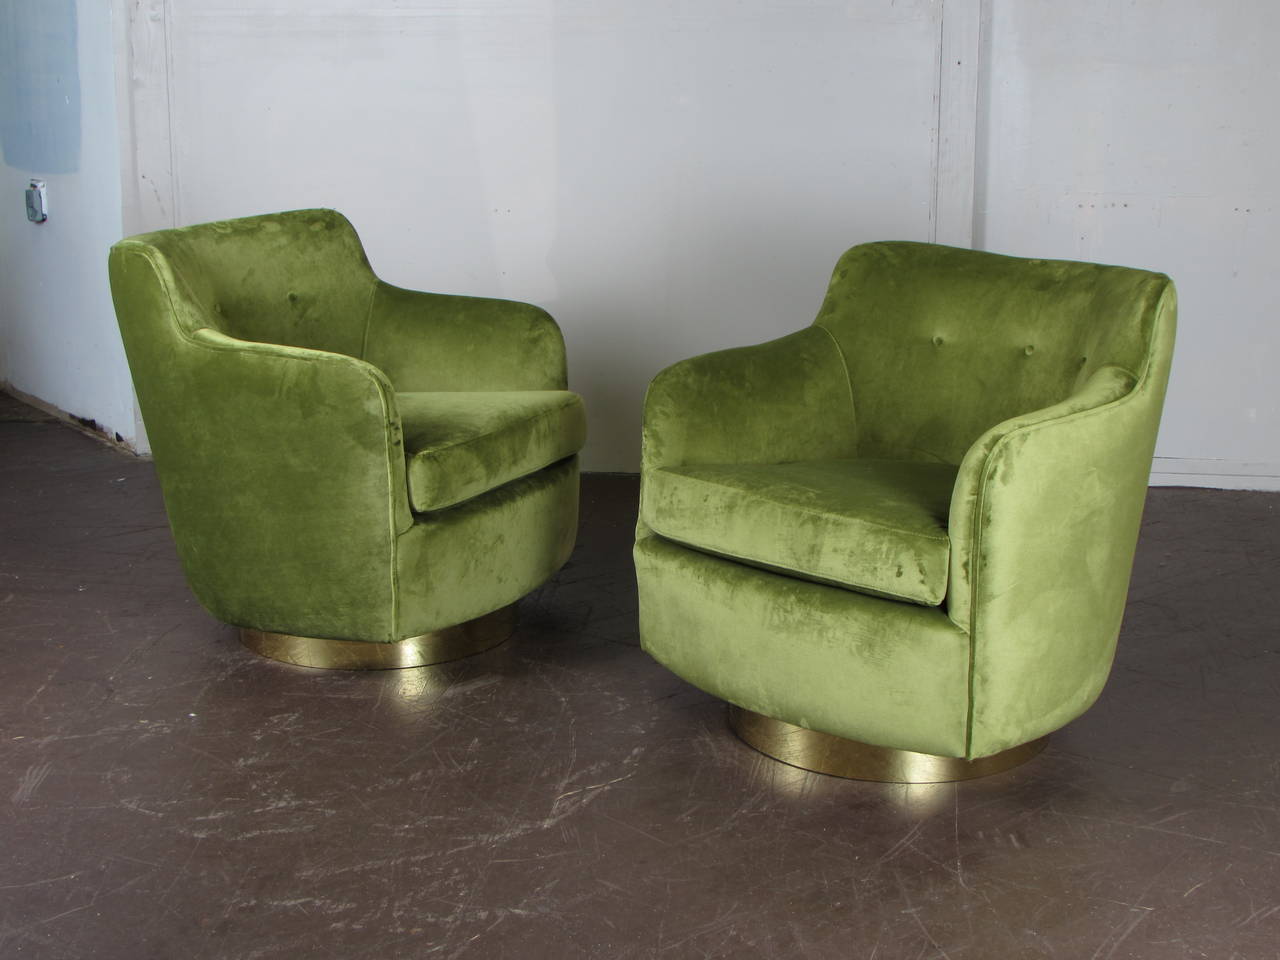 Extraordinary highback swivel chairs in velvet and bronze by Milo Baughman for Thayer Coggin, circa 1970. These chairs have been upholstered in a dark chartreuse / olive velvet. The bases have been restored in a custom bronze metal. These chairs